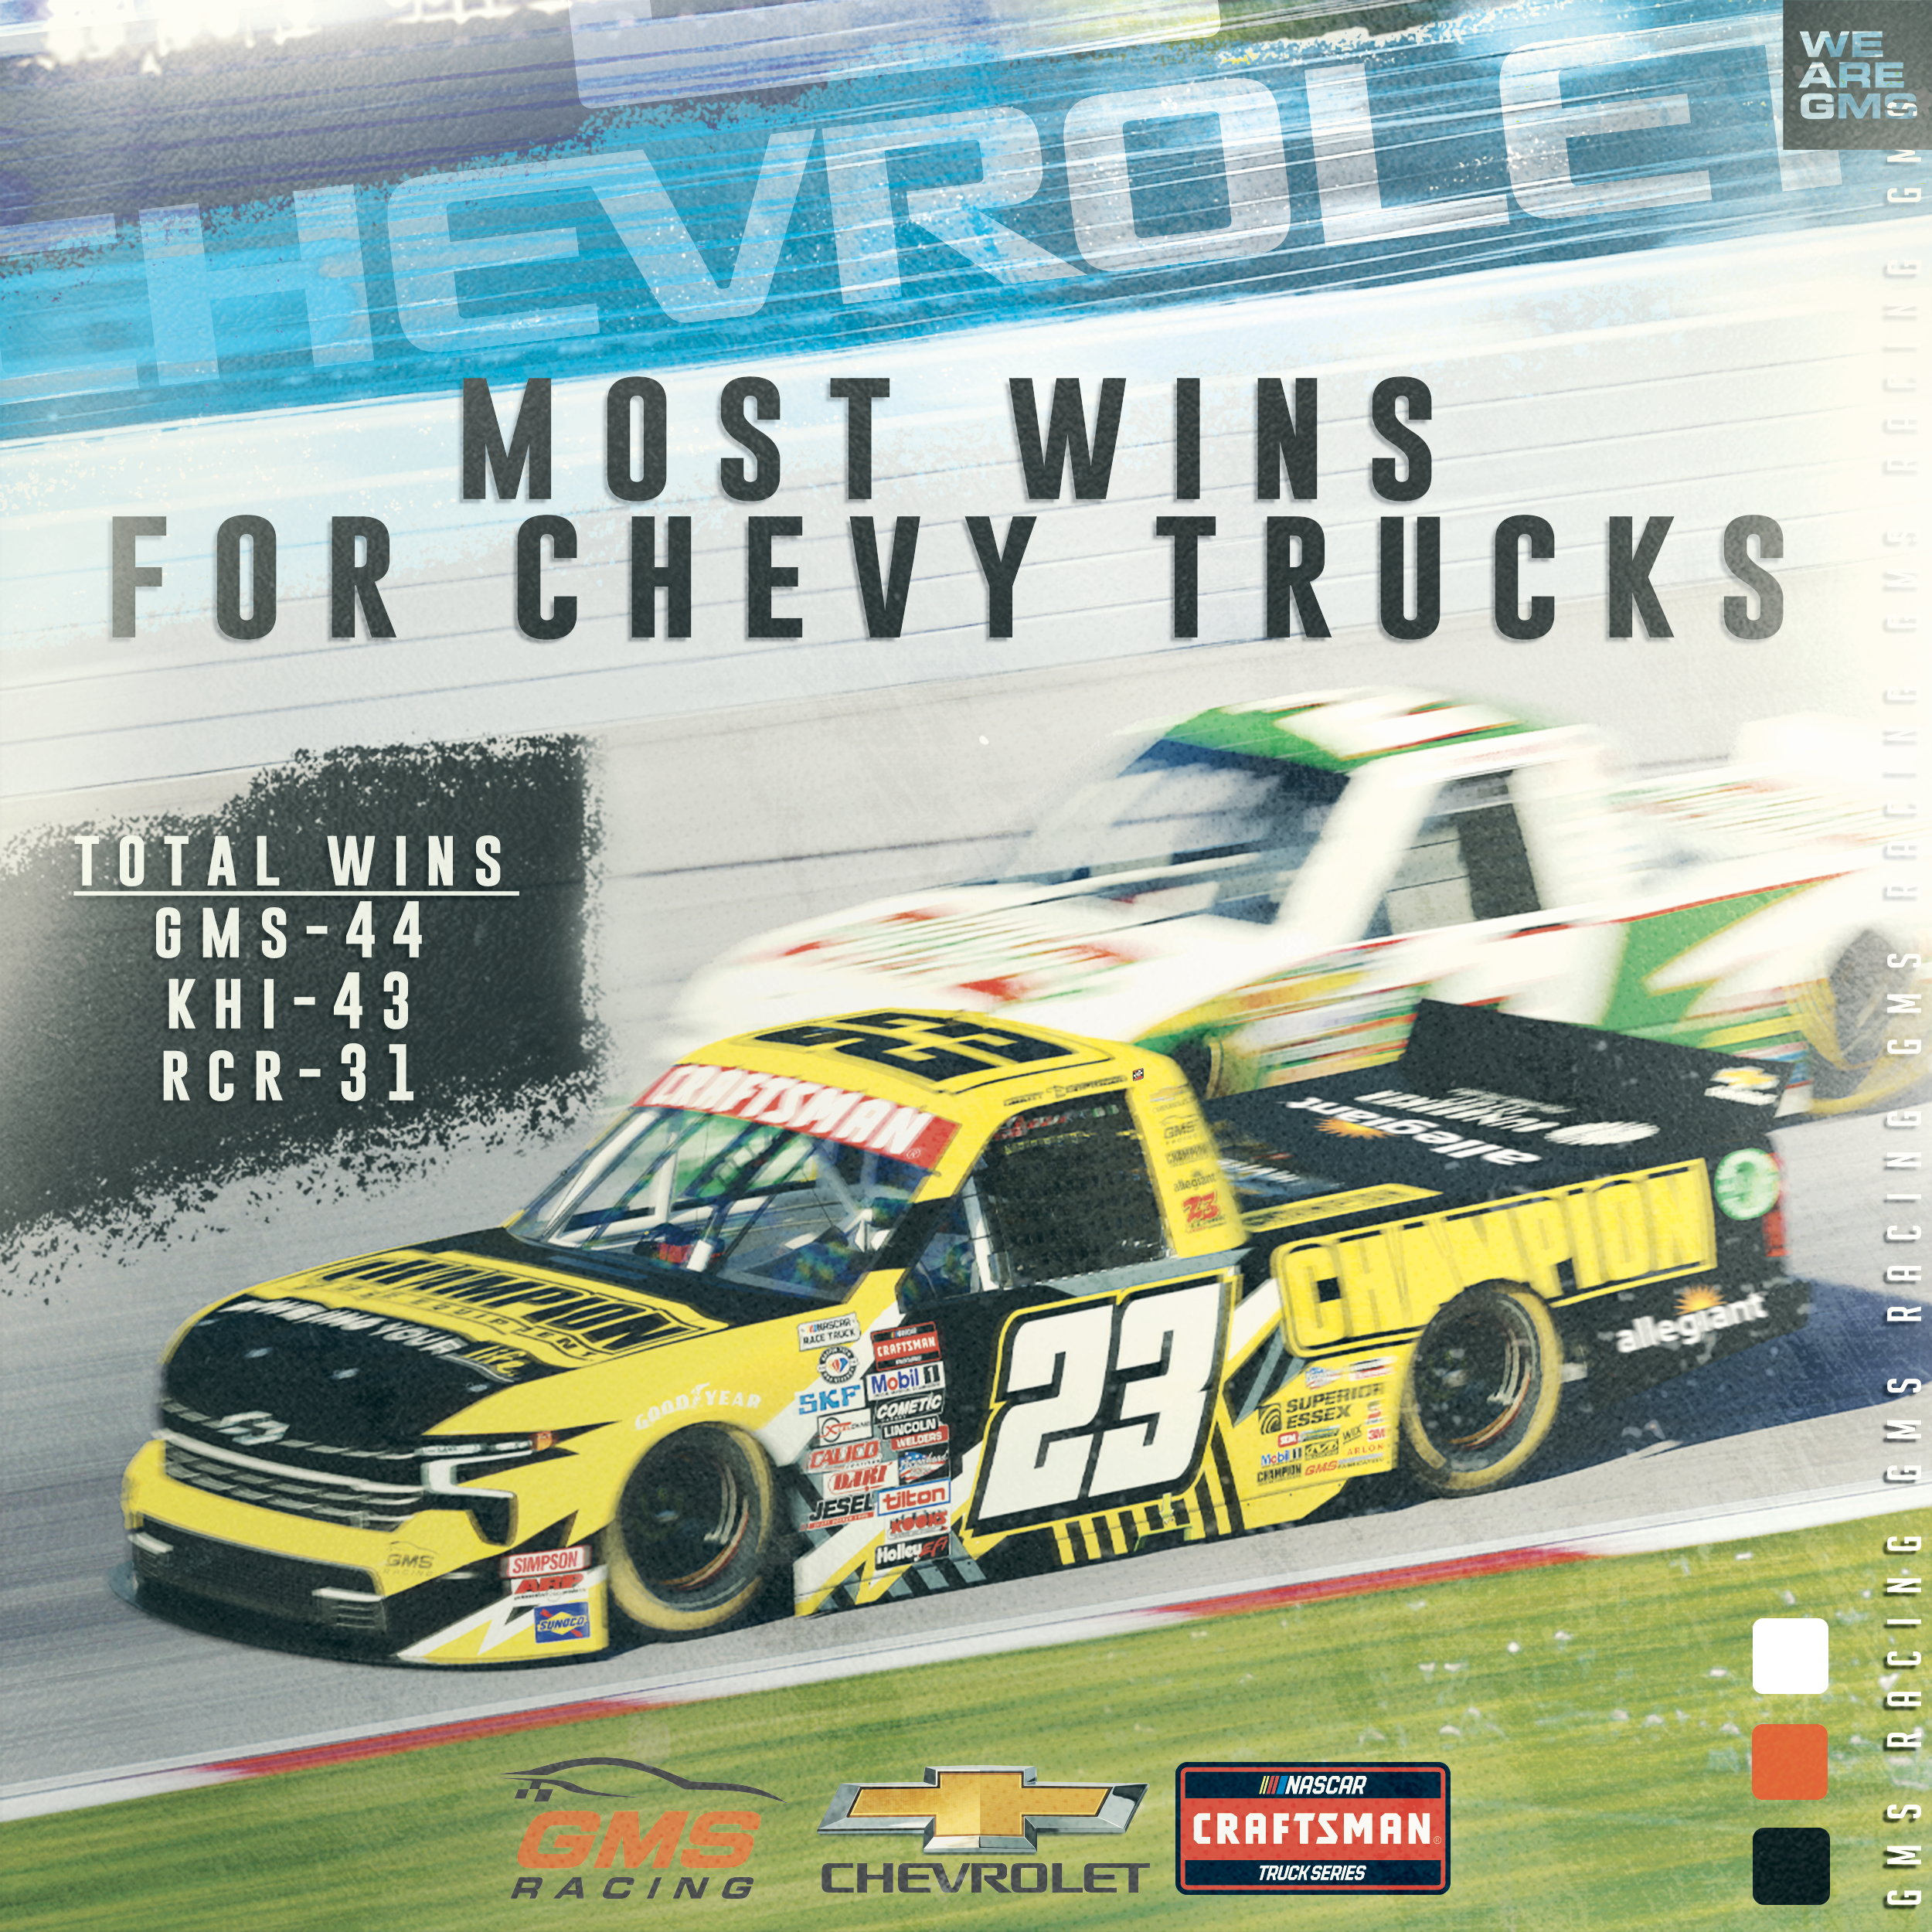 GMS Racing Secures Milestone Victory to Become Winningest Chevrolet Team in NASCAR CRAFTSMAN Truck Series History — GMS Racing